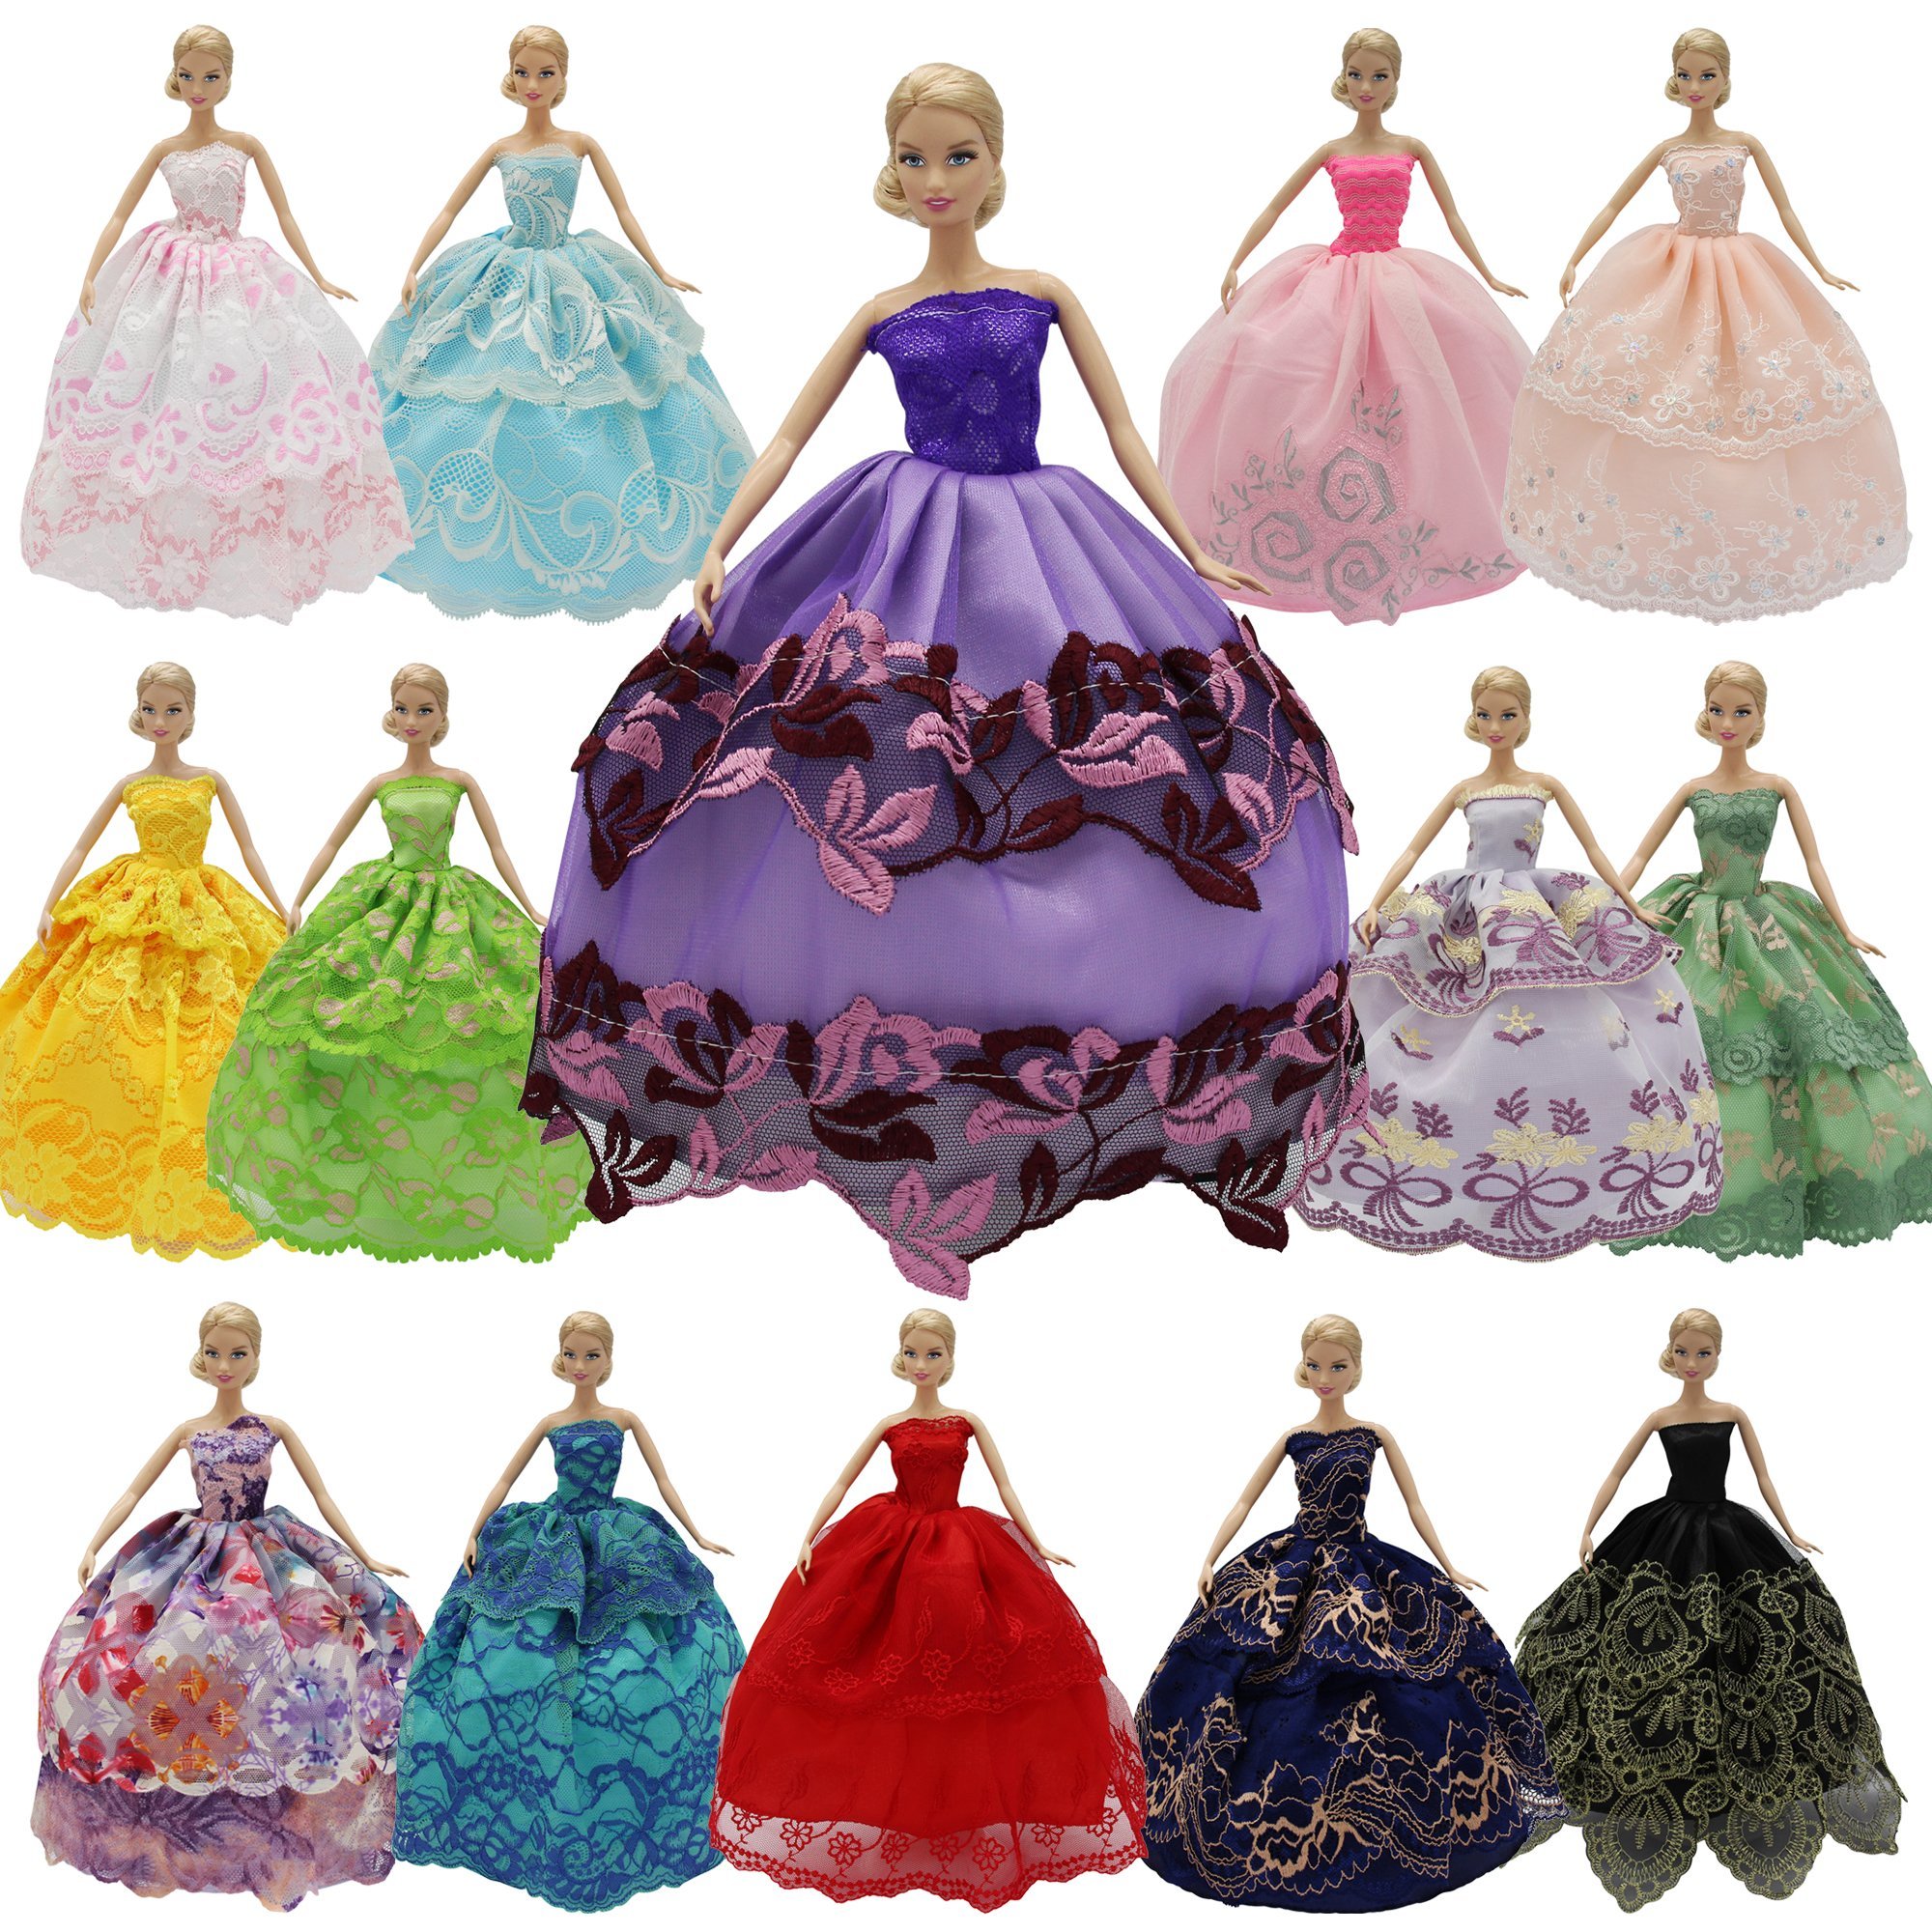 ZITA ELEMENT 6 PCS Fashion Handmade Wedding Party Dress Gown for Barbie Doll XMAS Gift - Random Style Outfits